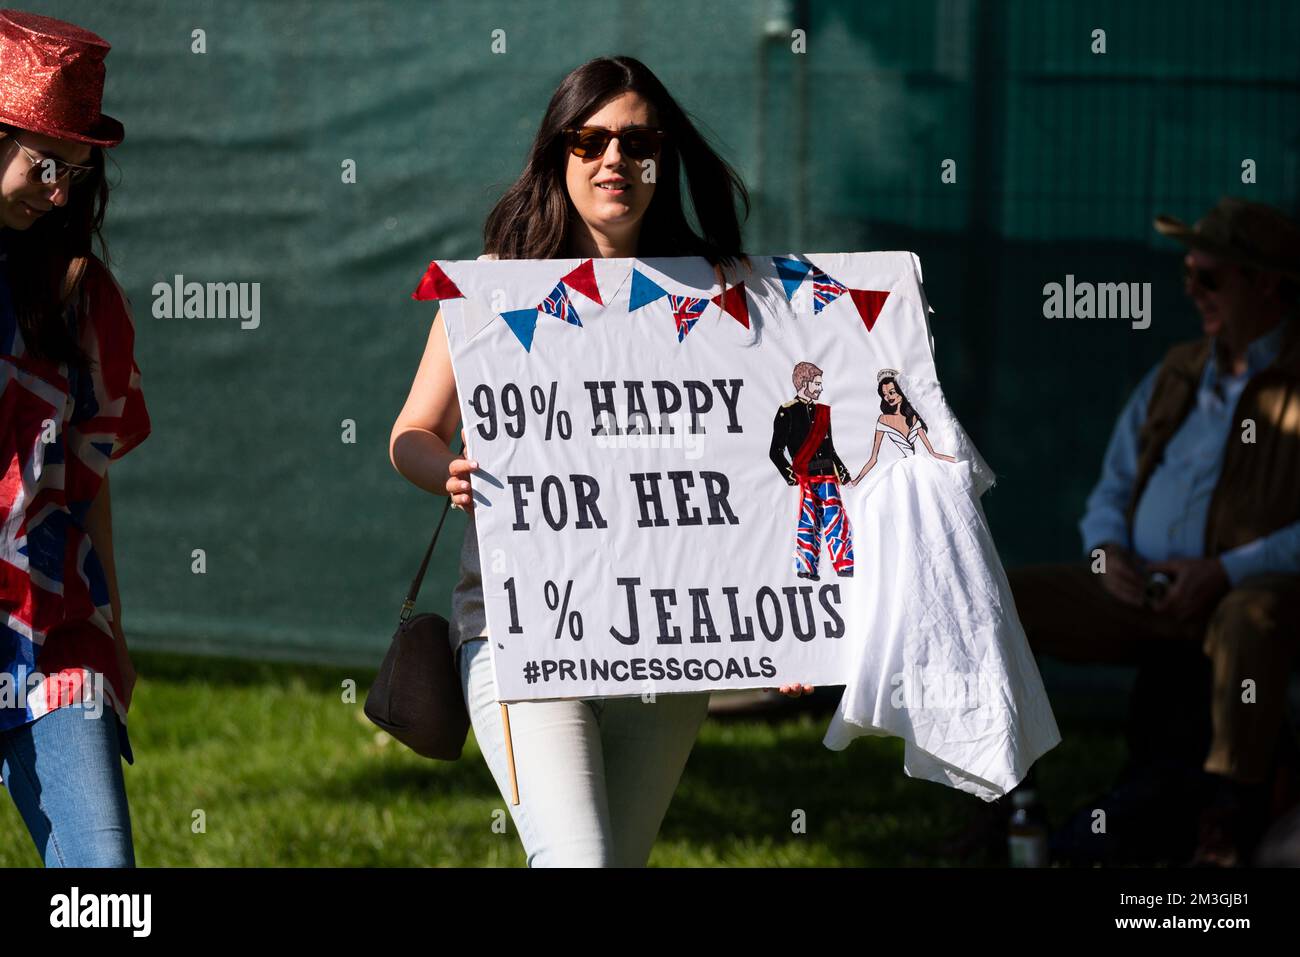 Female with Princess Goals placard at the Royal Wedding of Prince Harry and Meghan Markle at Windsor.  Happy & jealous. Wedding dress design Stock Photo